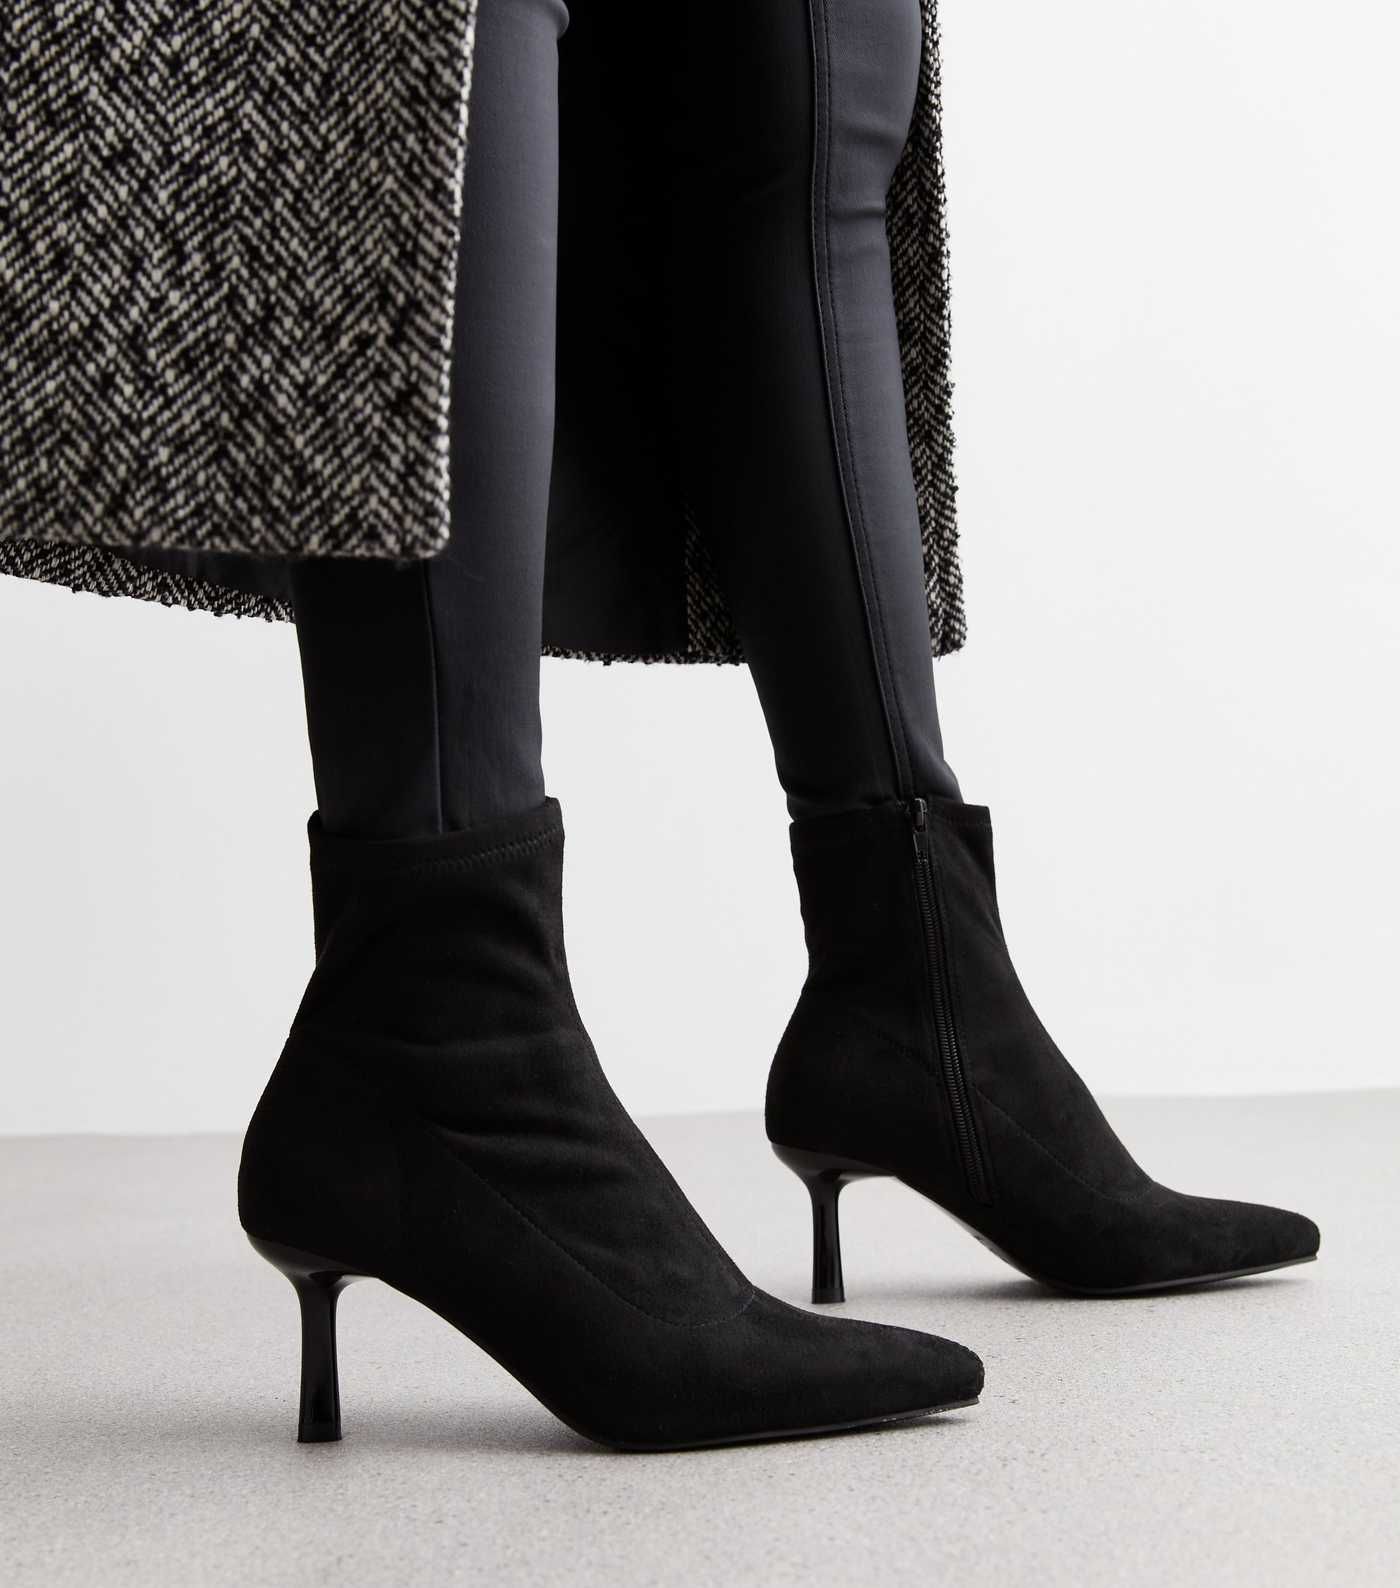 Black Suedette Stiletto Heel Sock Boots
						
						Add to Saved Items
						Remove from Saved I... | New Look (UK)